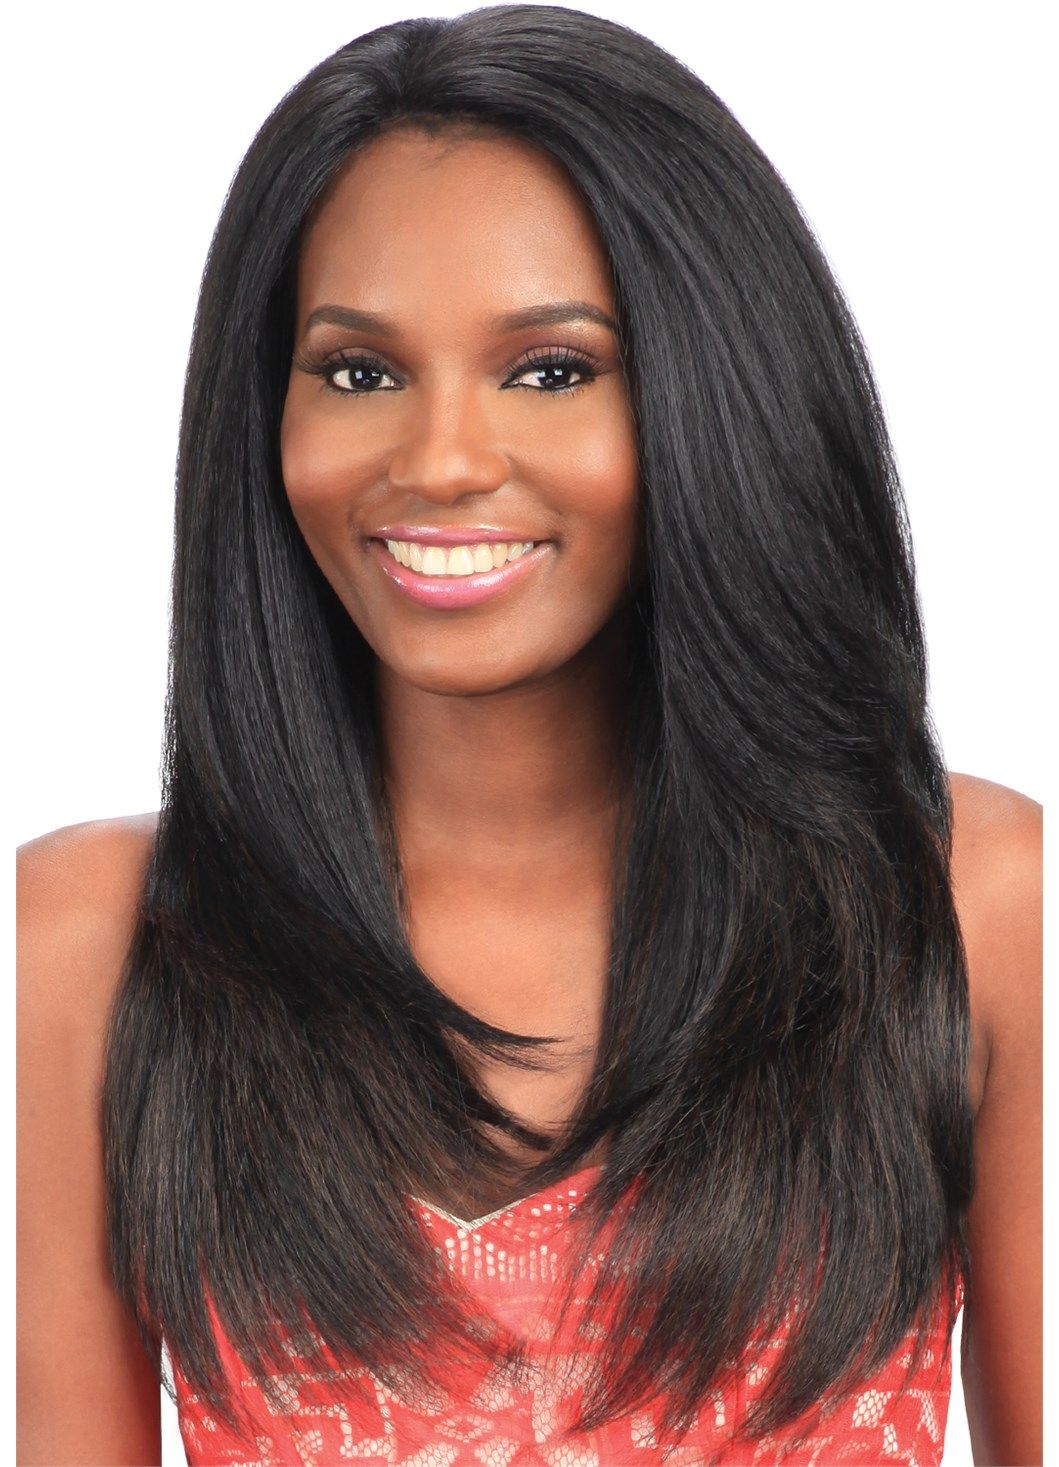 Real Beauty Revealed: Top Trends in Women’s Human Hair Wigs